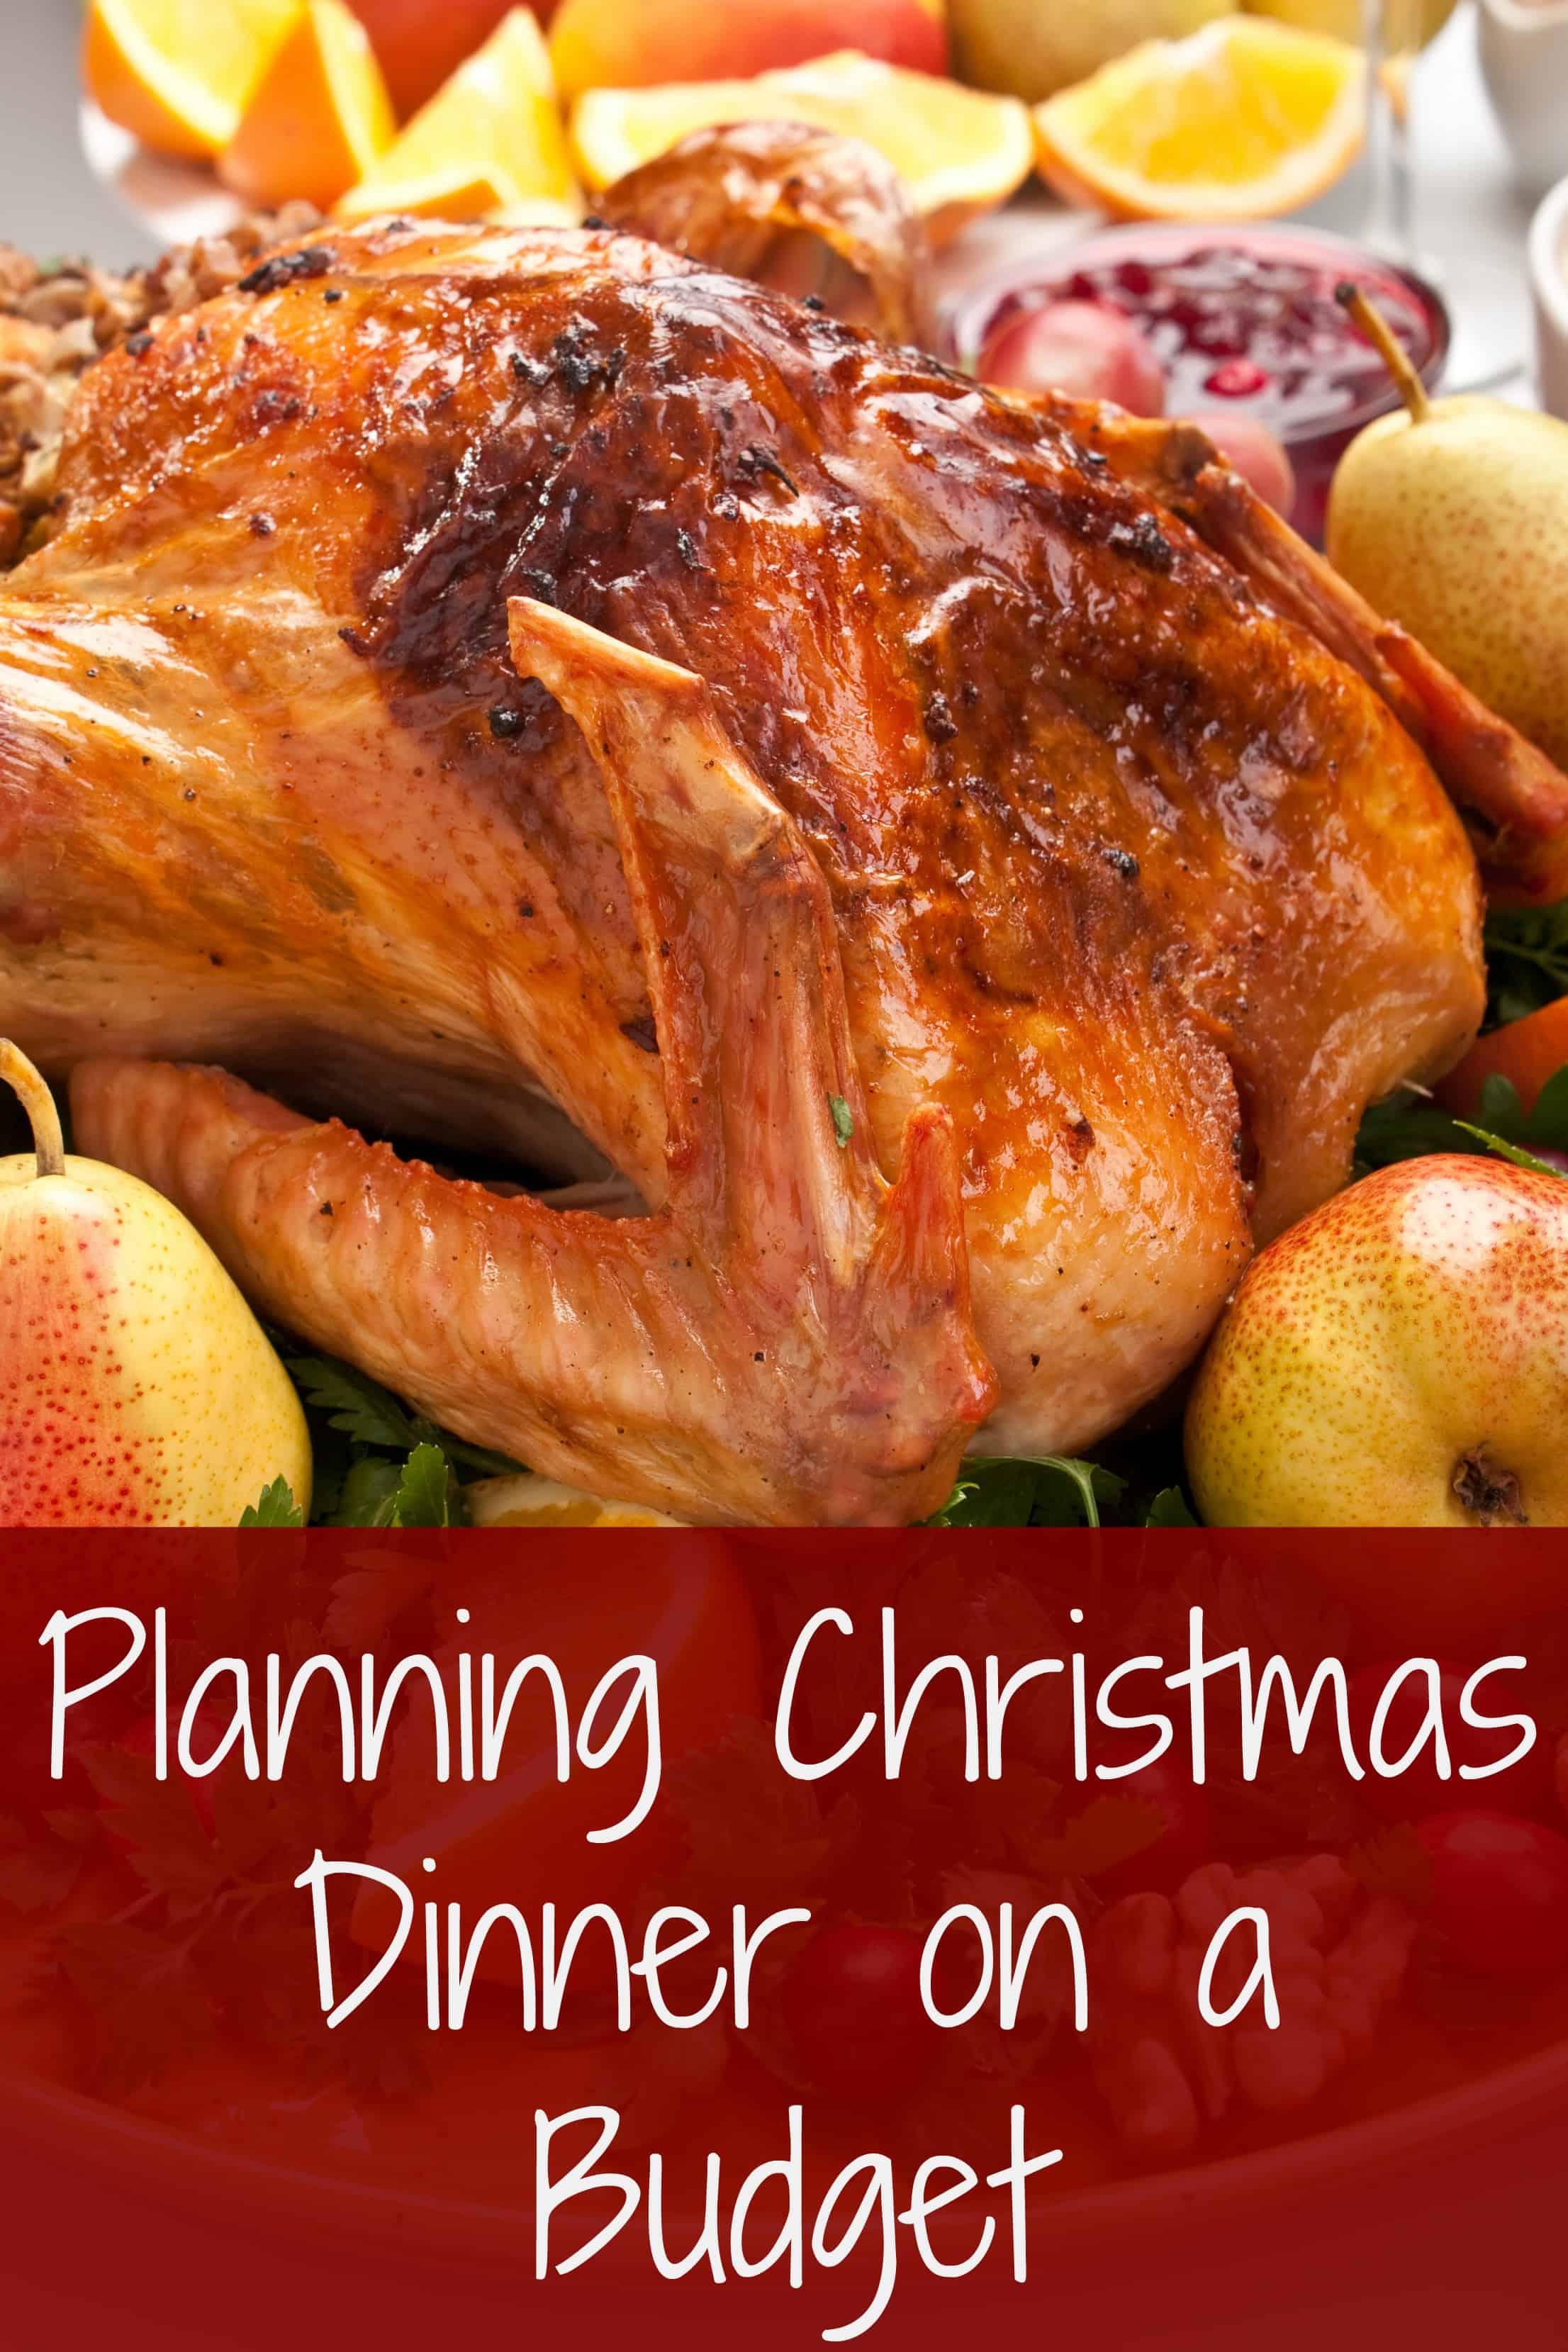 Planning Christmas dinner on a budget never seems easy. There’s the cost of food and the time you spend making it. However, the holidays seem to suck out any penny you own. Check out these tips for learning to plan Christmas dinner on a budget. - Farmer's Wife Rambles